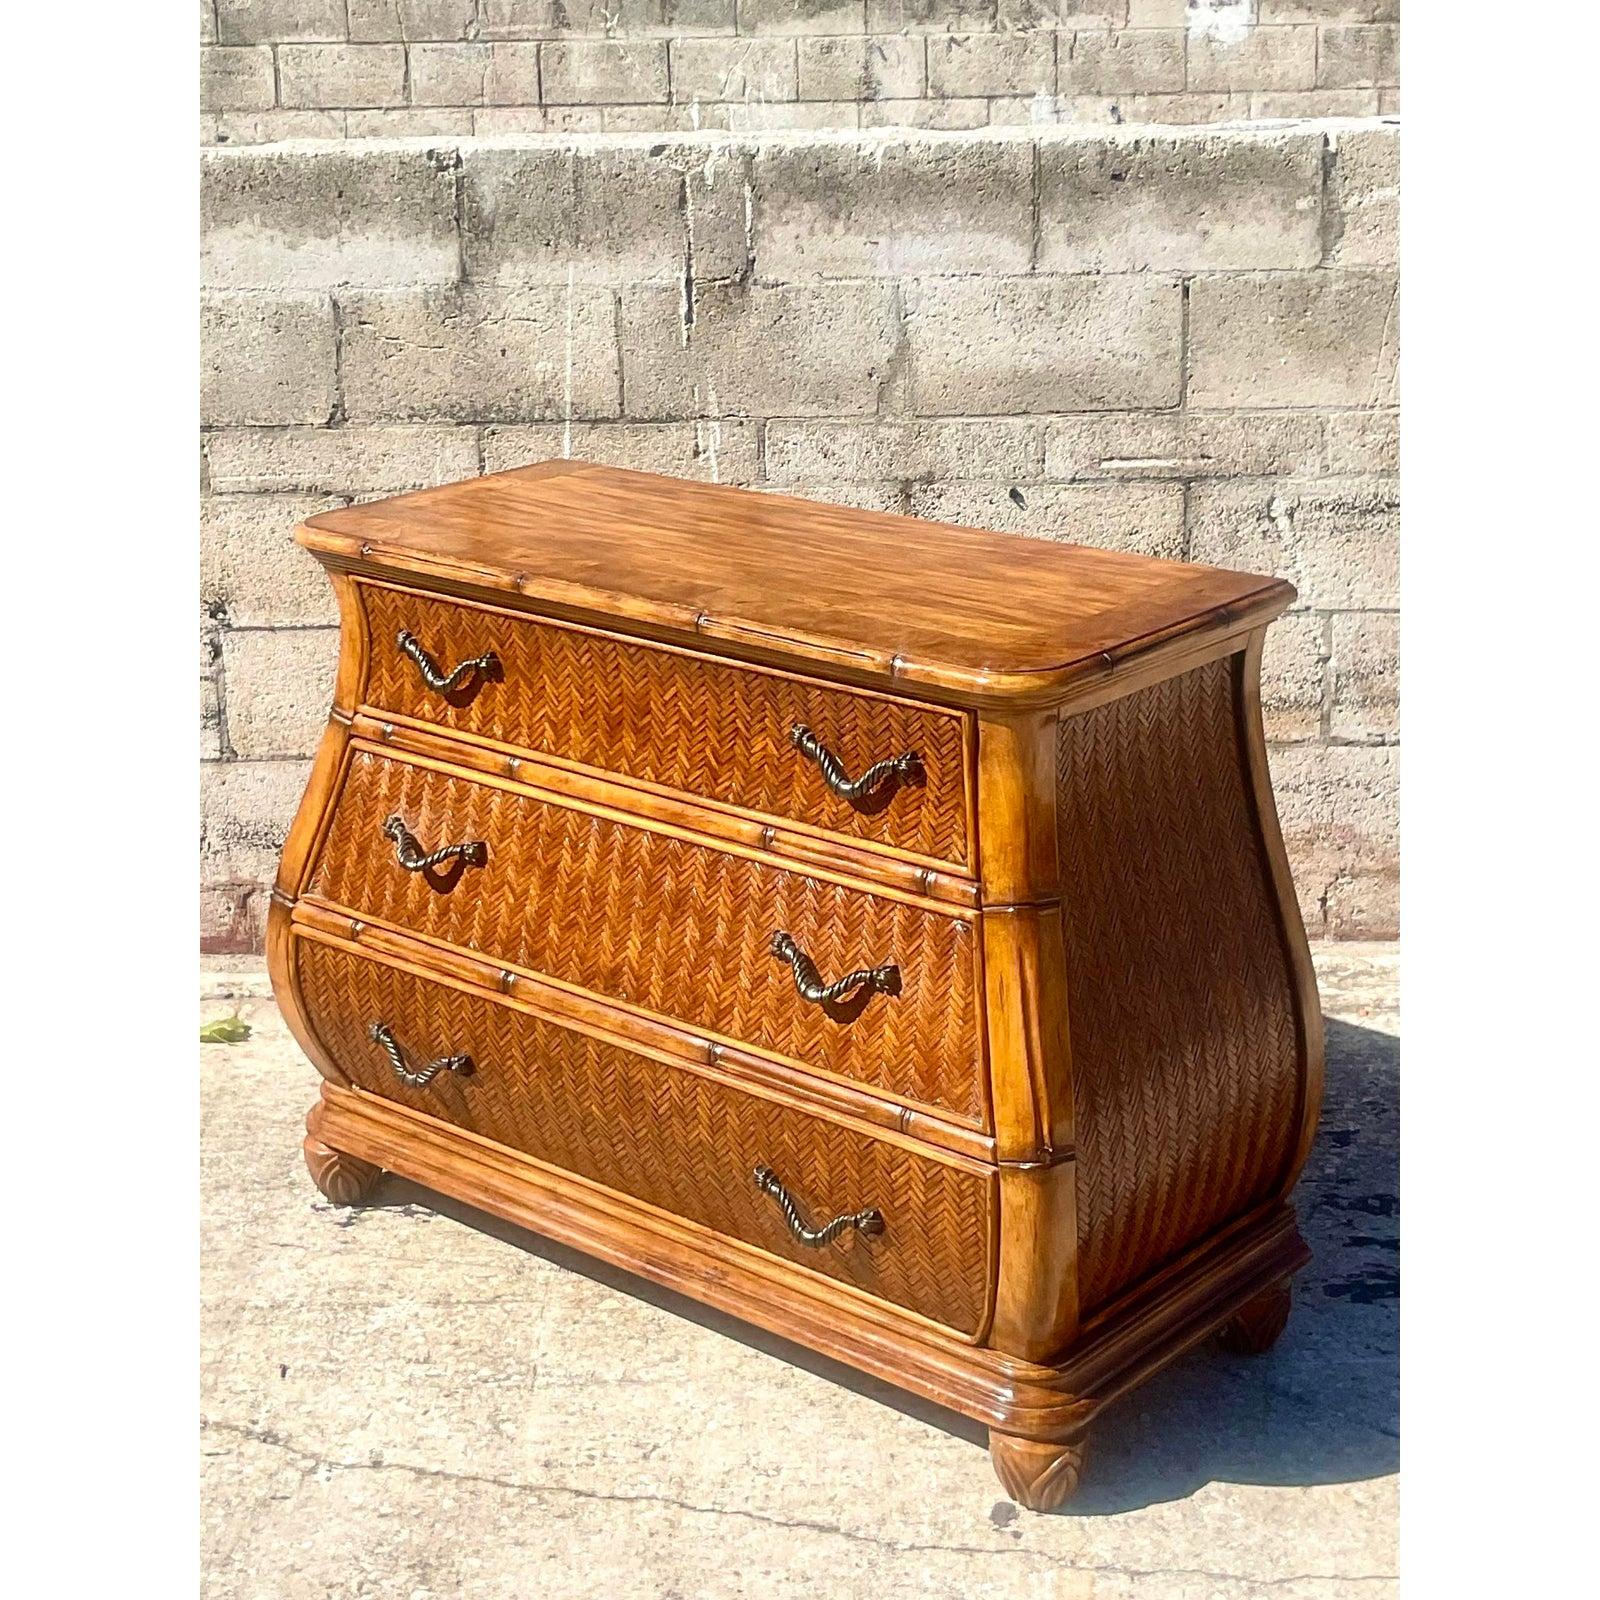 Fantastic vintage Coastal carved bamboo chest of drawers. A deep rich brown cabinet with inset woven rattan panels. A chic curved shape with beautiful ornate hardware. Acquired from a Palm Beach estate.